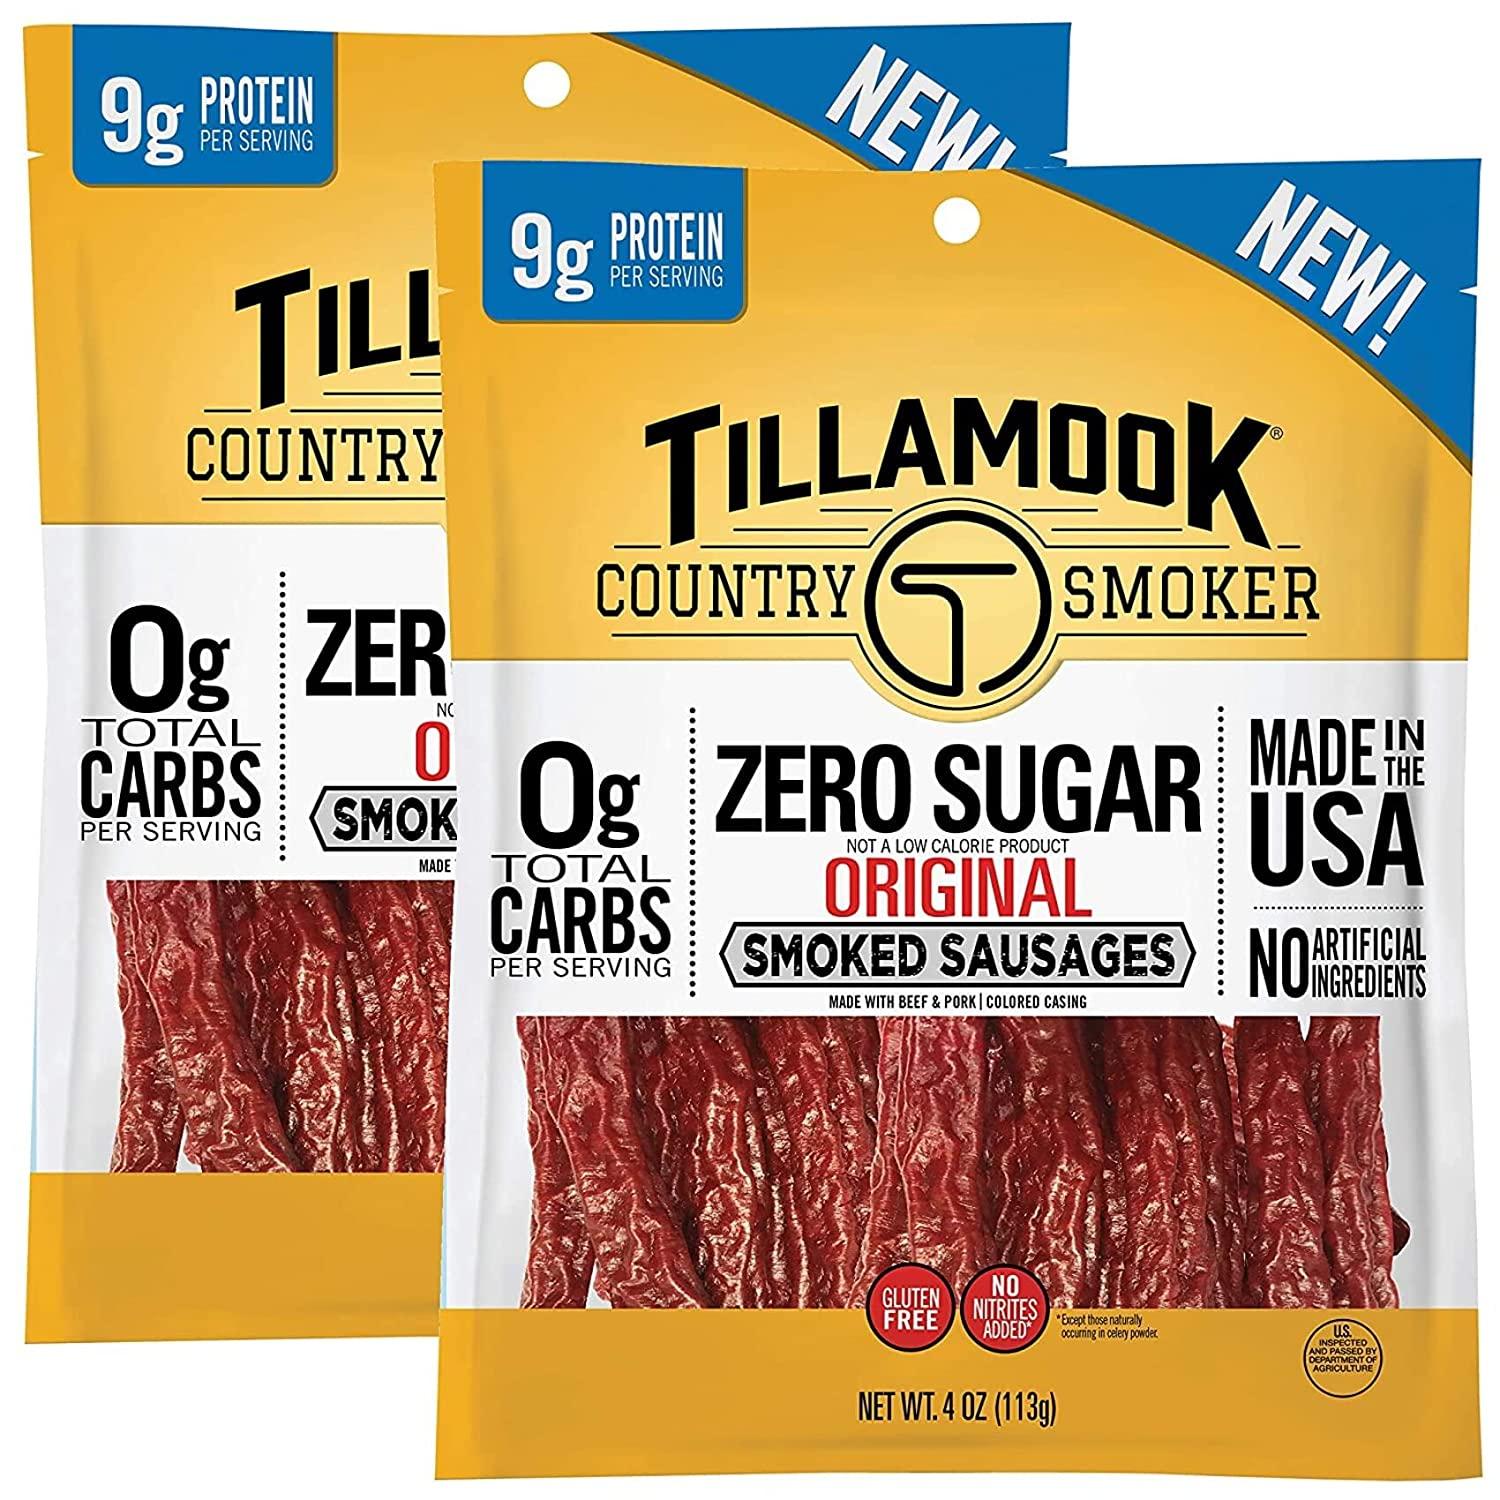 Tillamook Country Smoker Keto Friendly Smoked Sausages 2 Pack for $6.98 Shipped